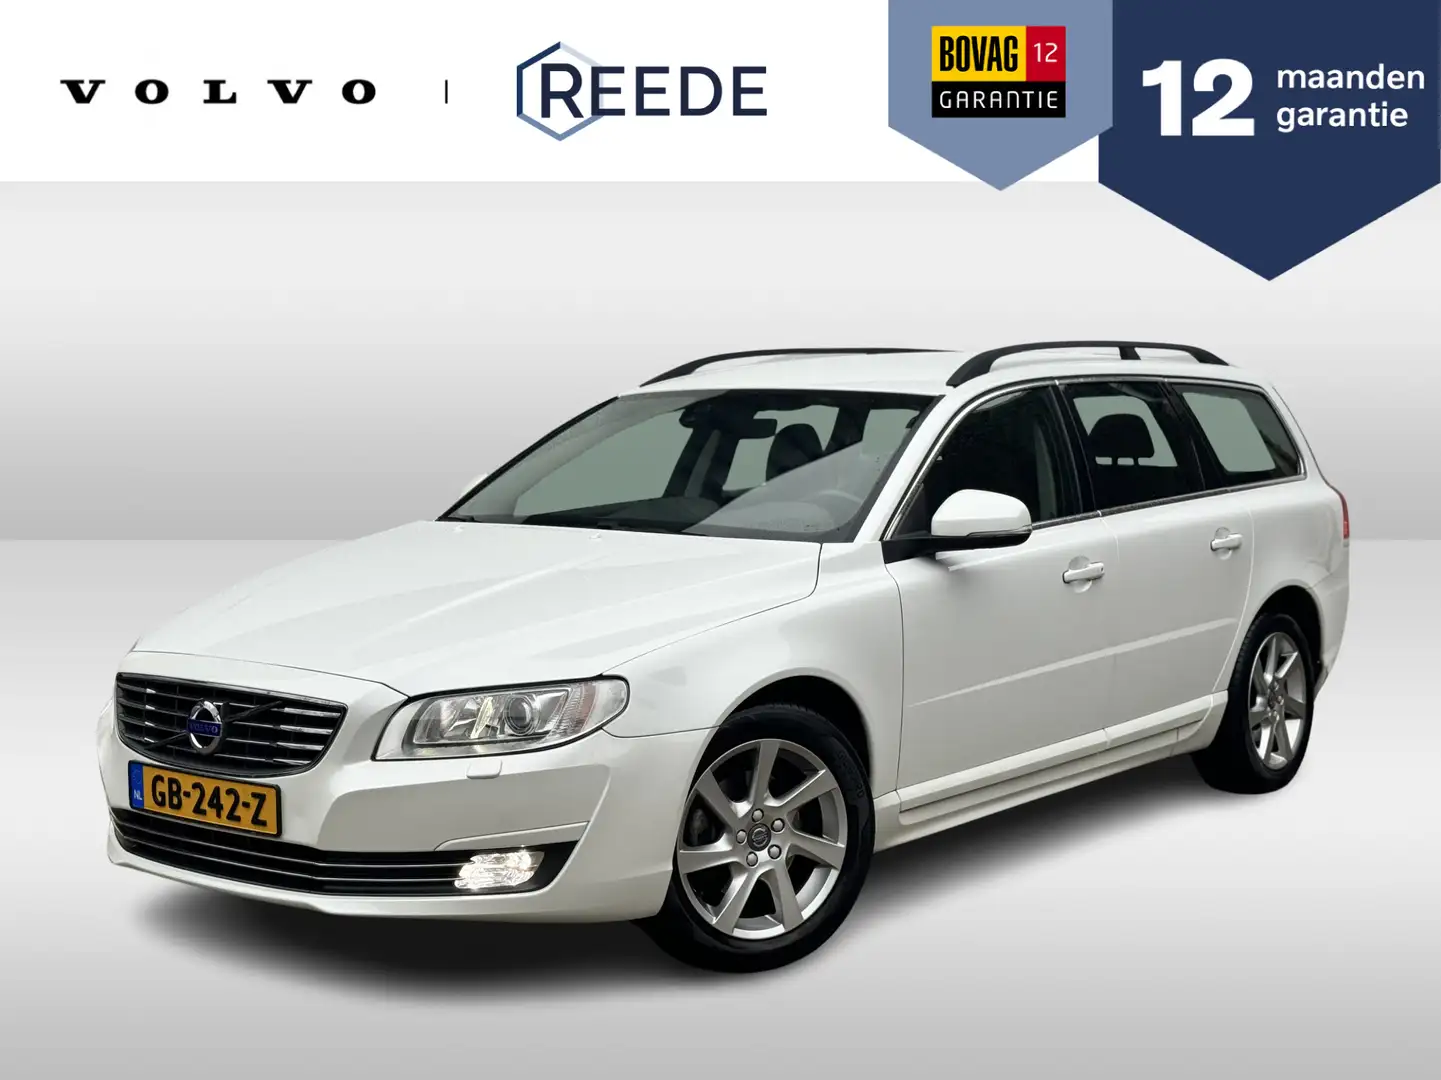 Volvo V70 1.6 T4 Automaat Nordic+ Parkeerverwarming | Select White - 1